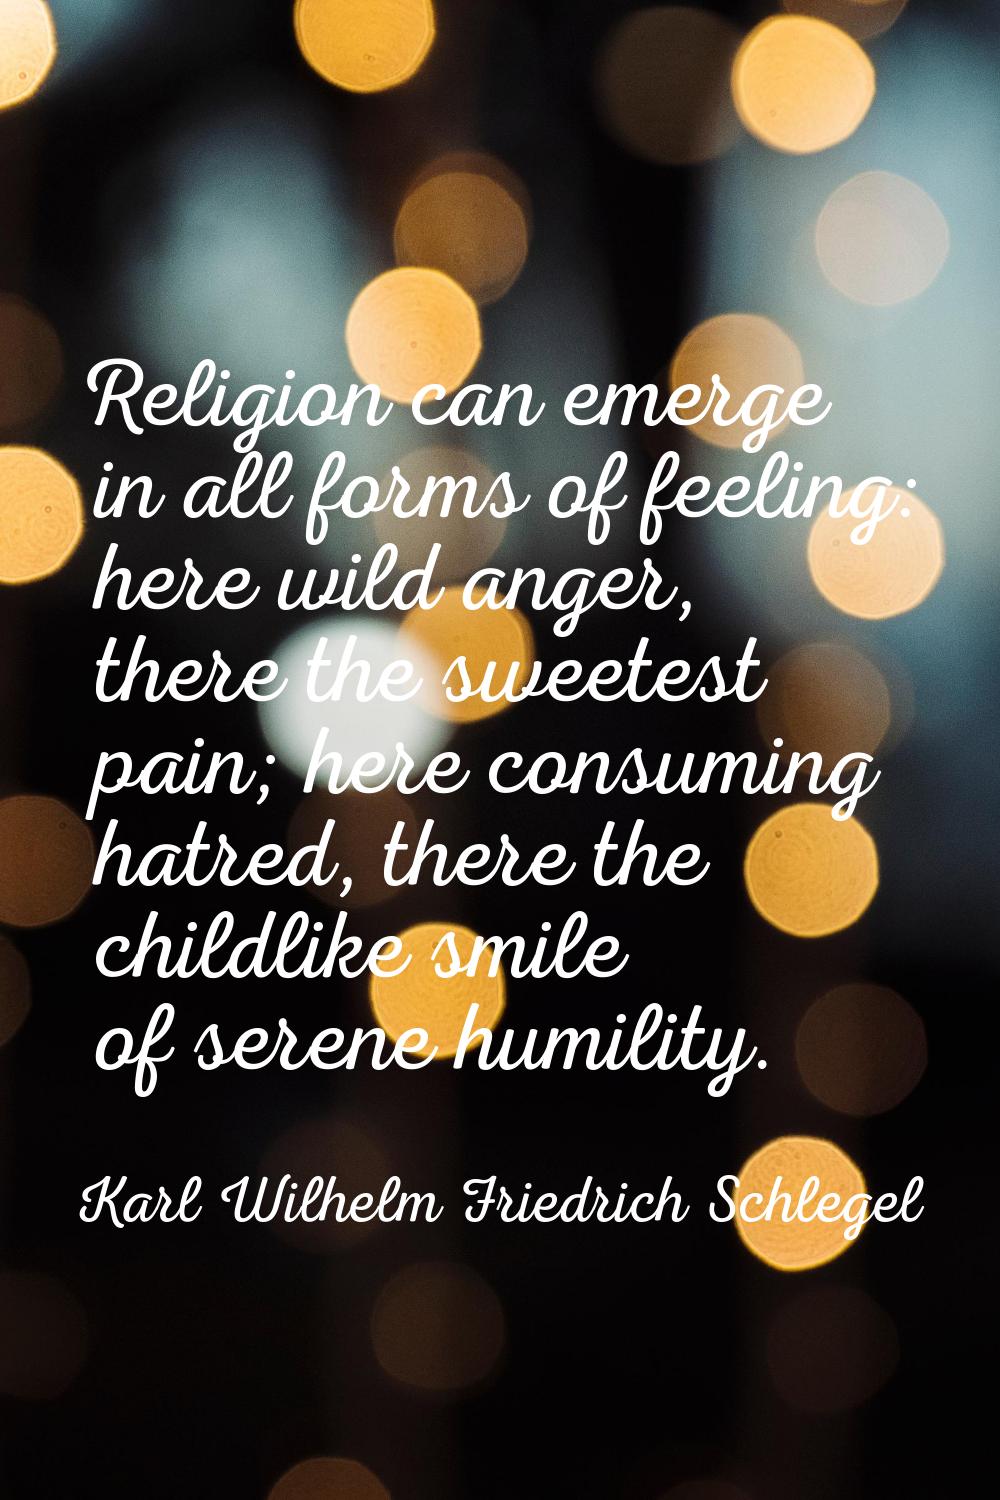 Religion can emerge in all forms of feeling: here wild anger, there the sweetest pain; here consumi